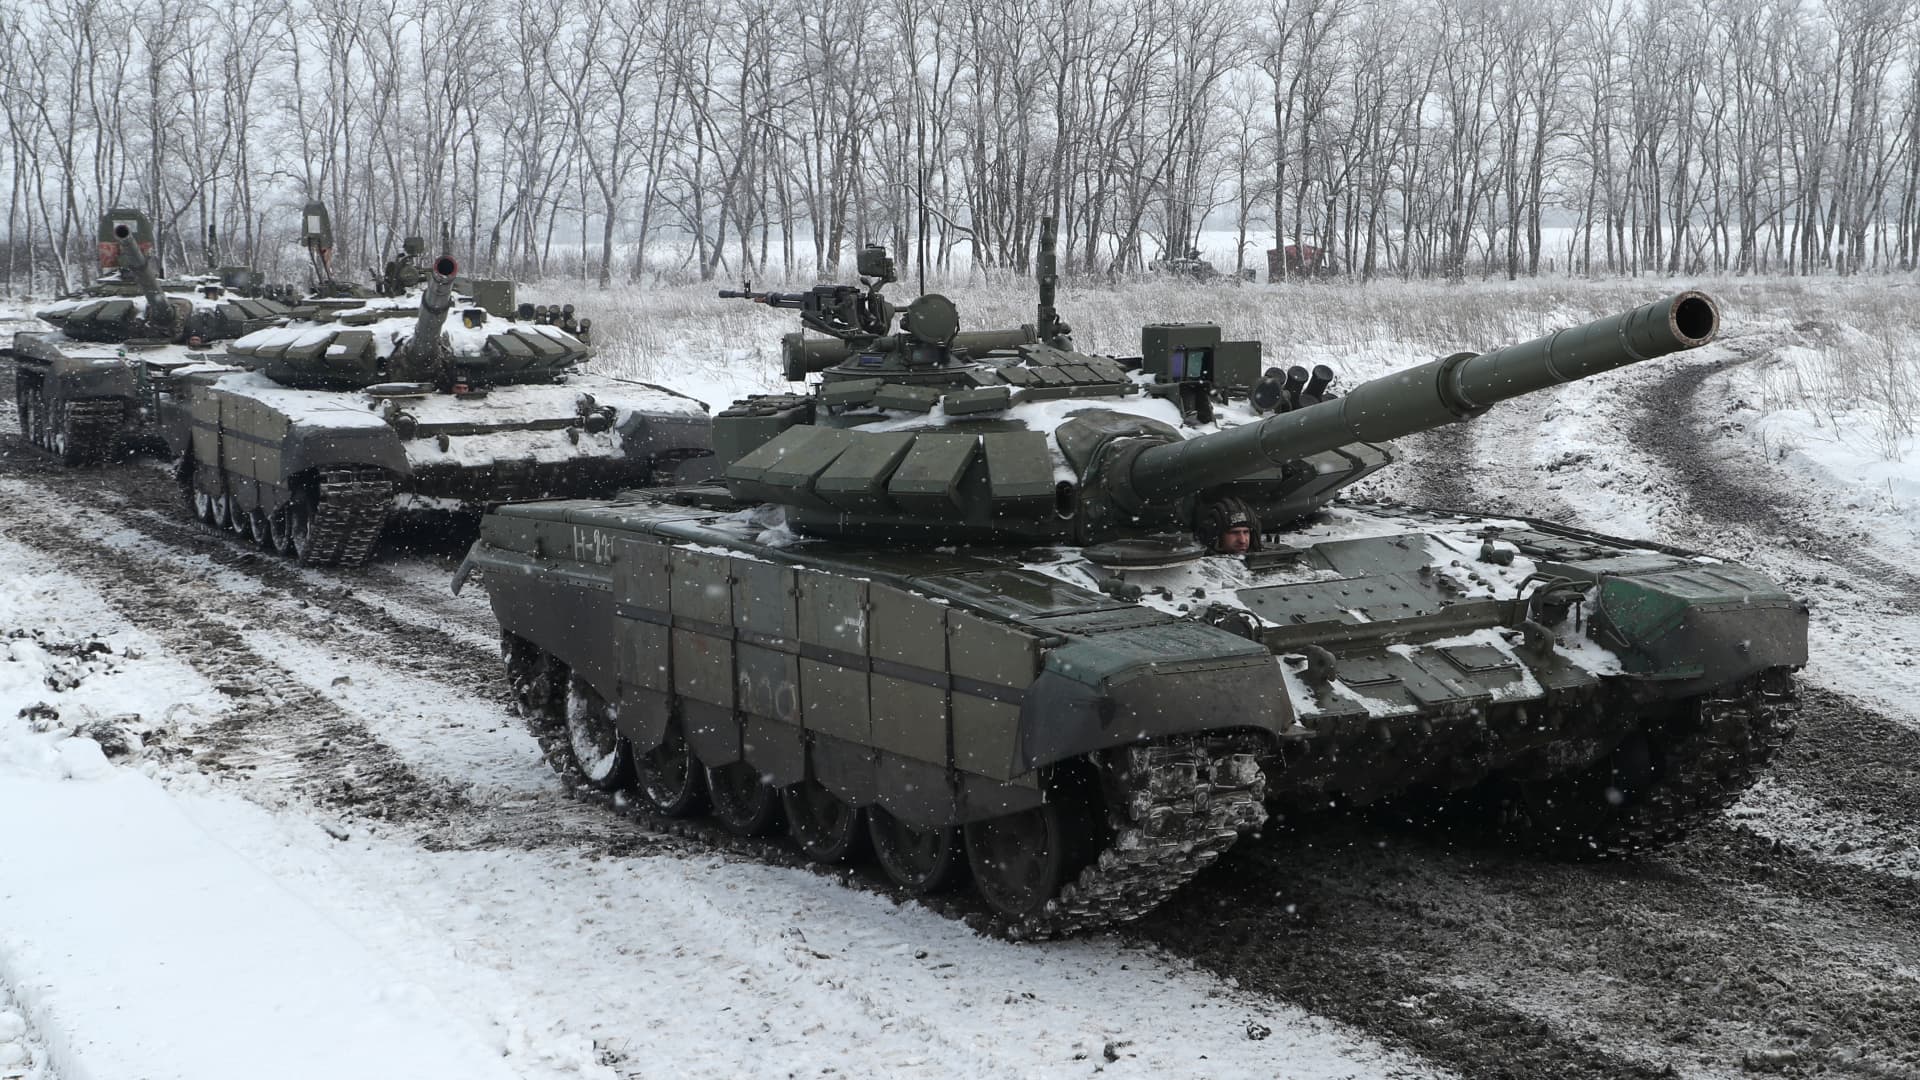 T-72B3 tanks of the Russian Southern Military District's 150th Rifle Division take part in a military exercise.